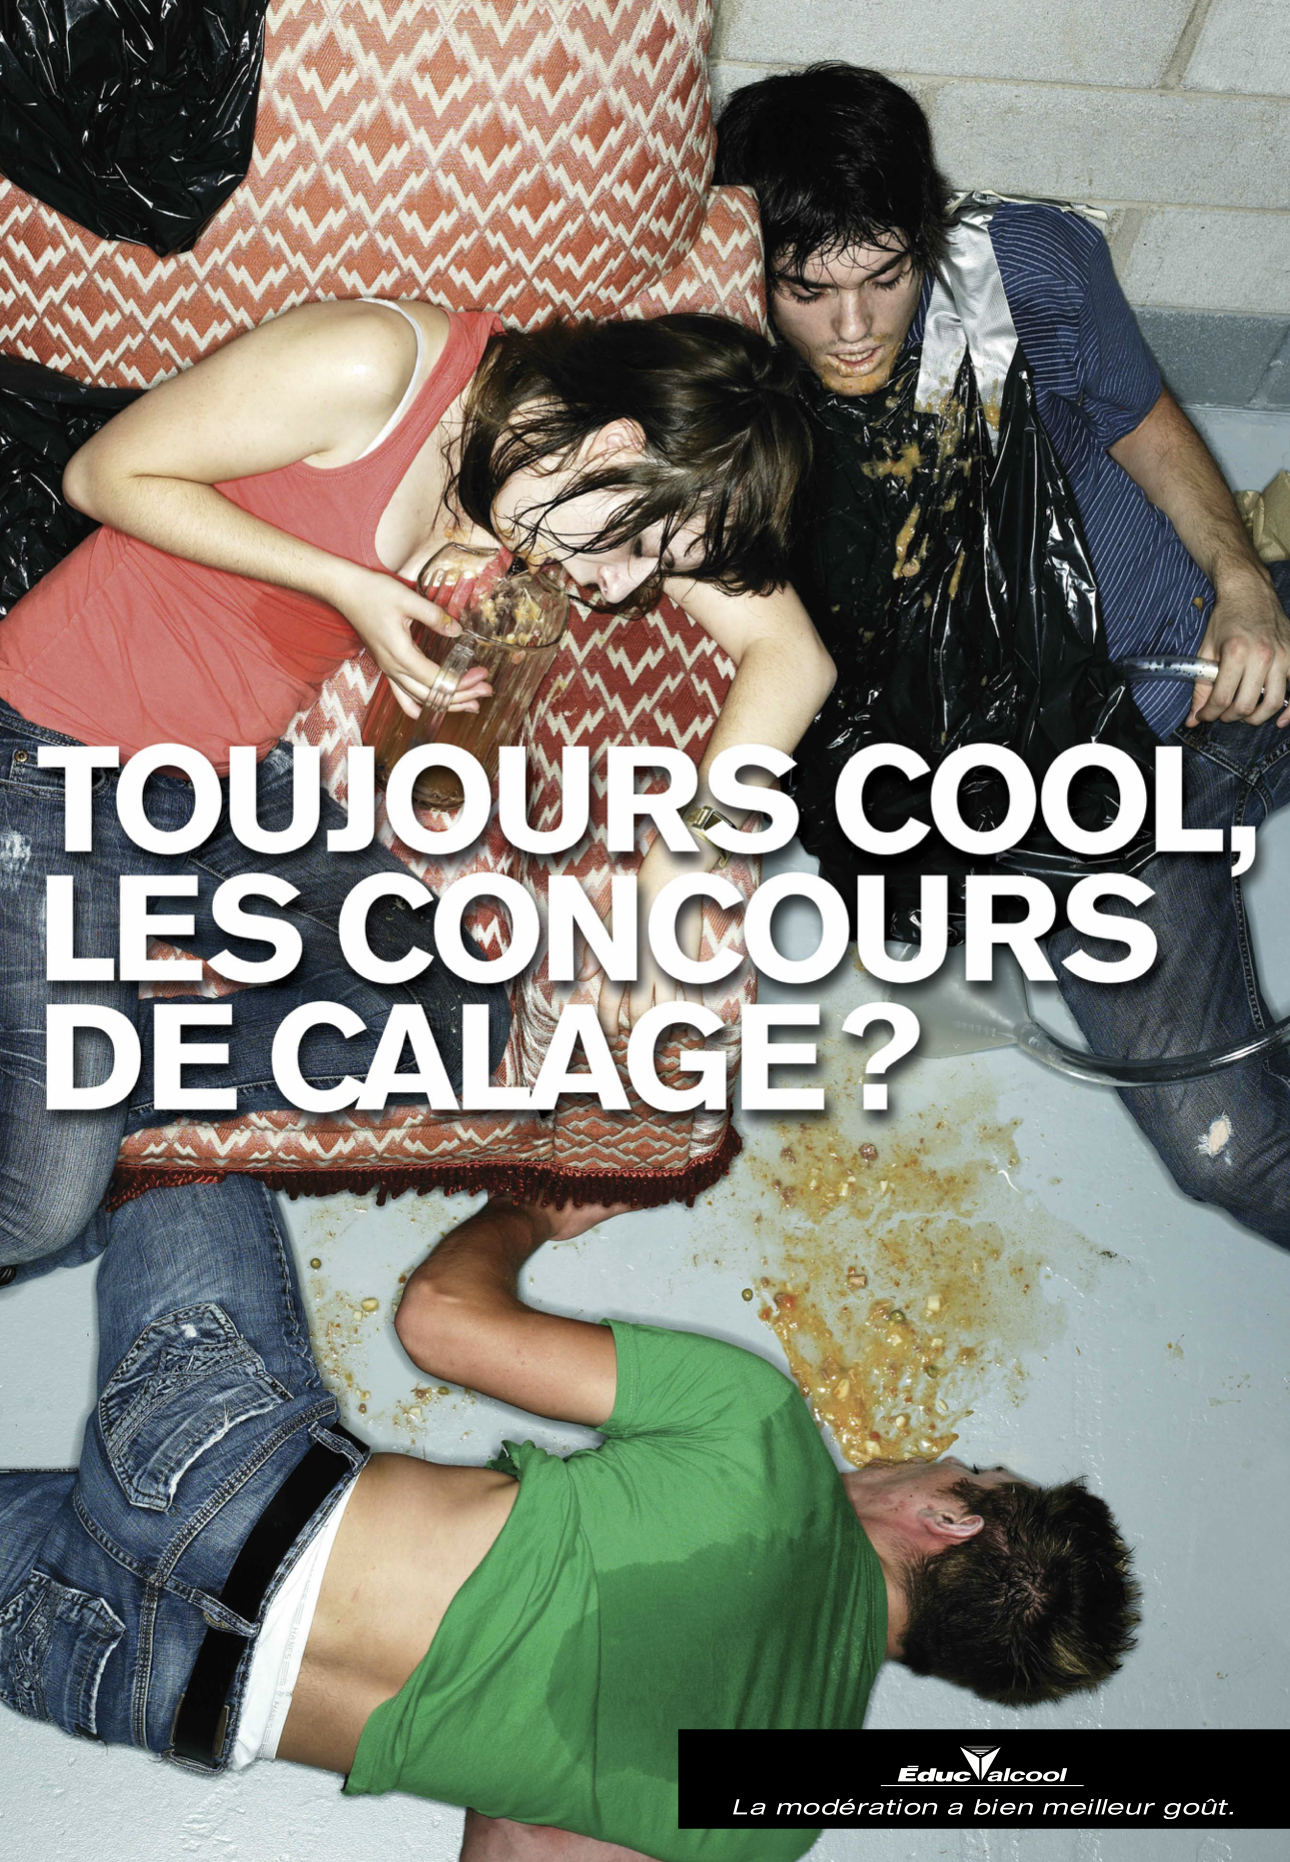 Calage d’alcool